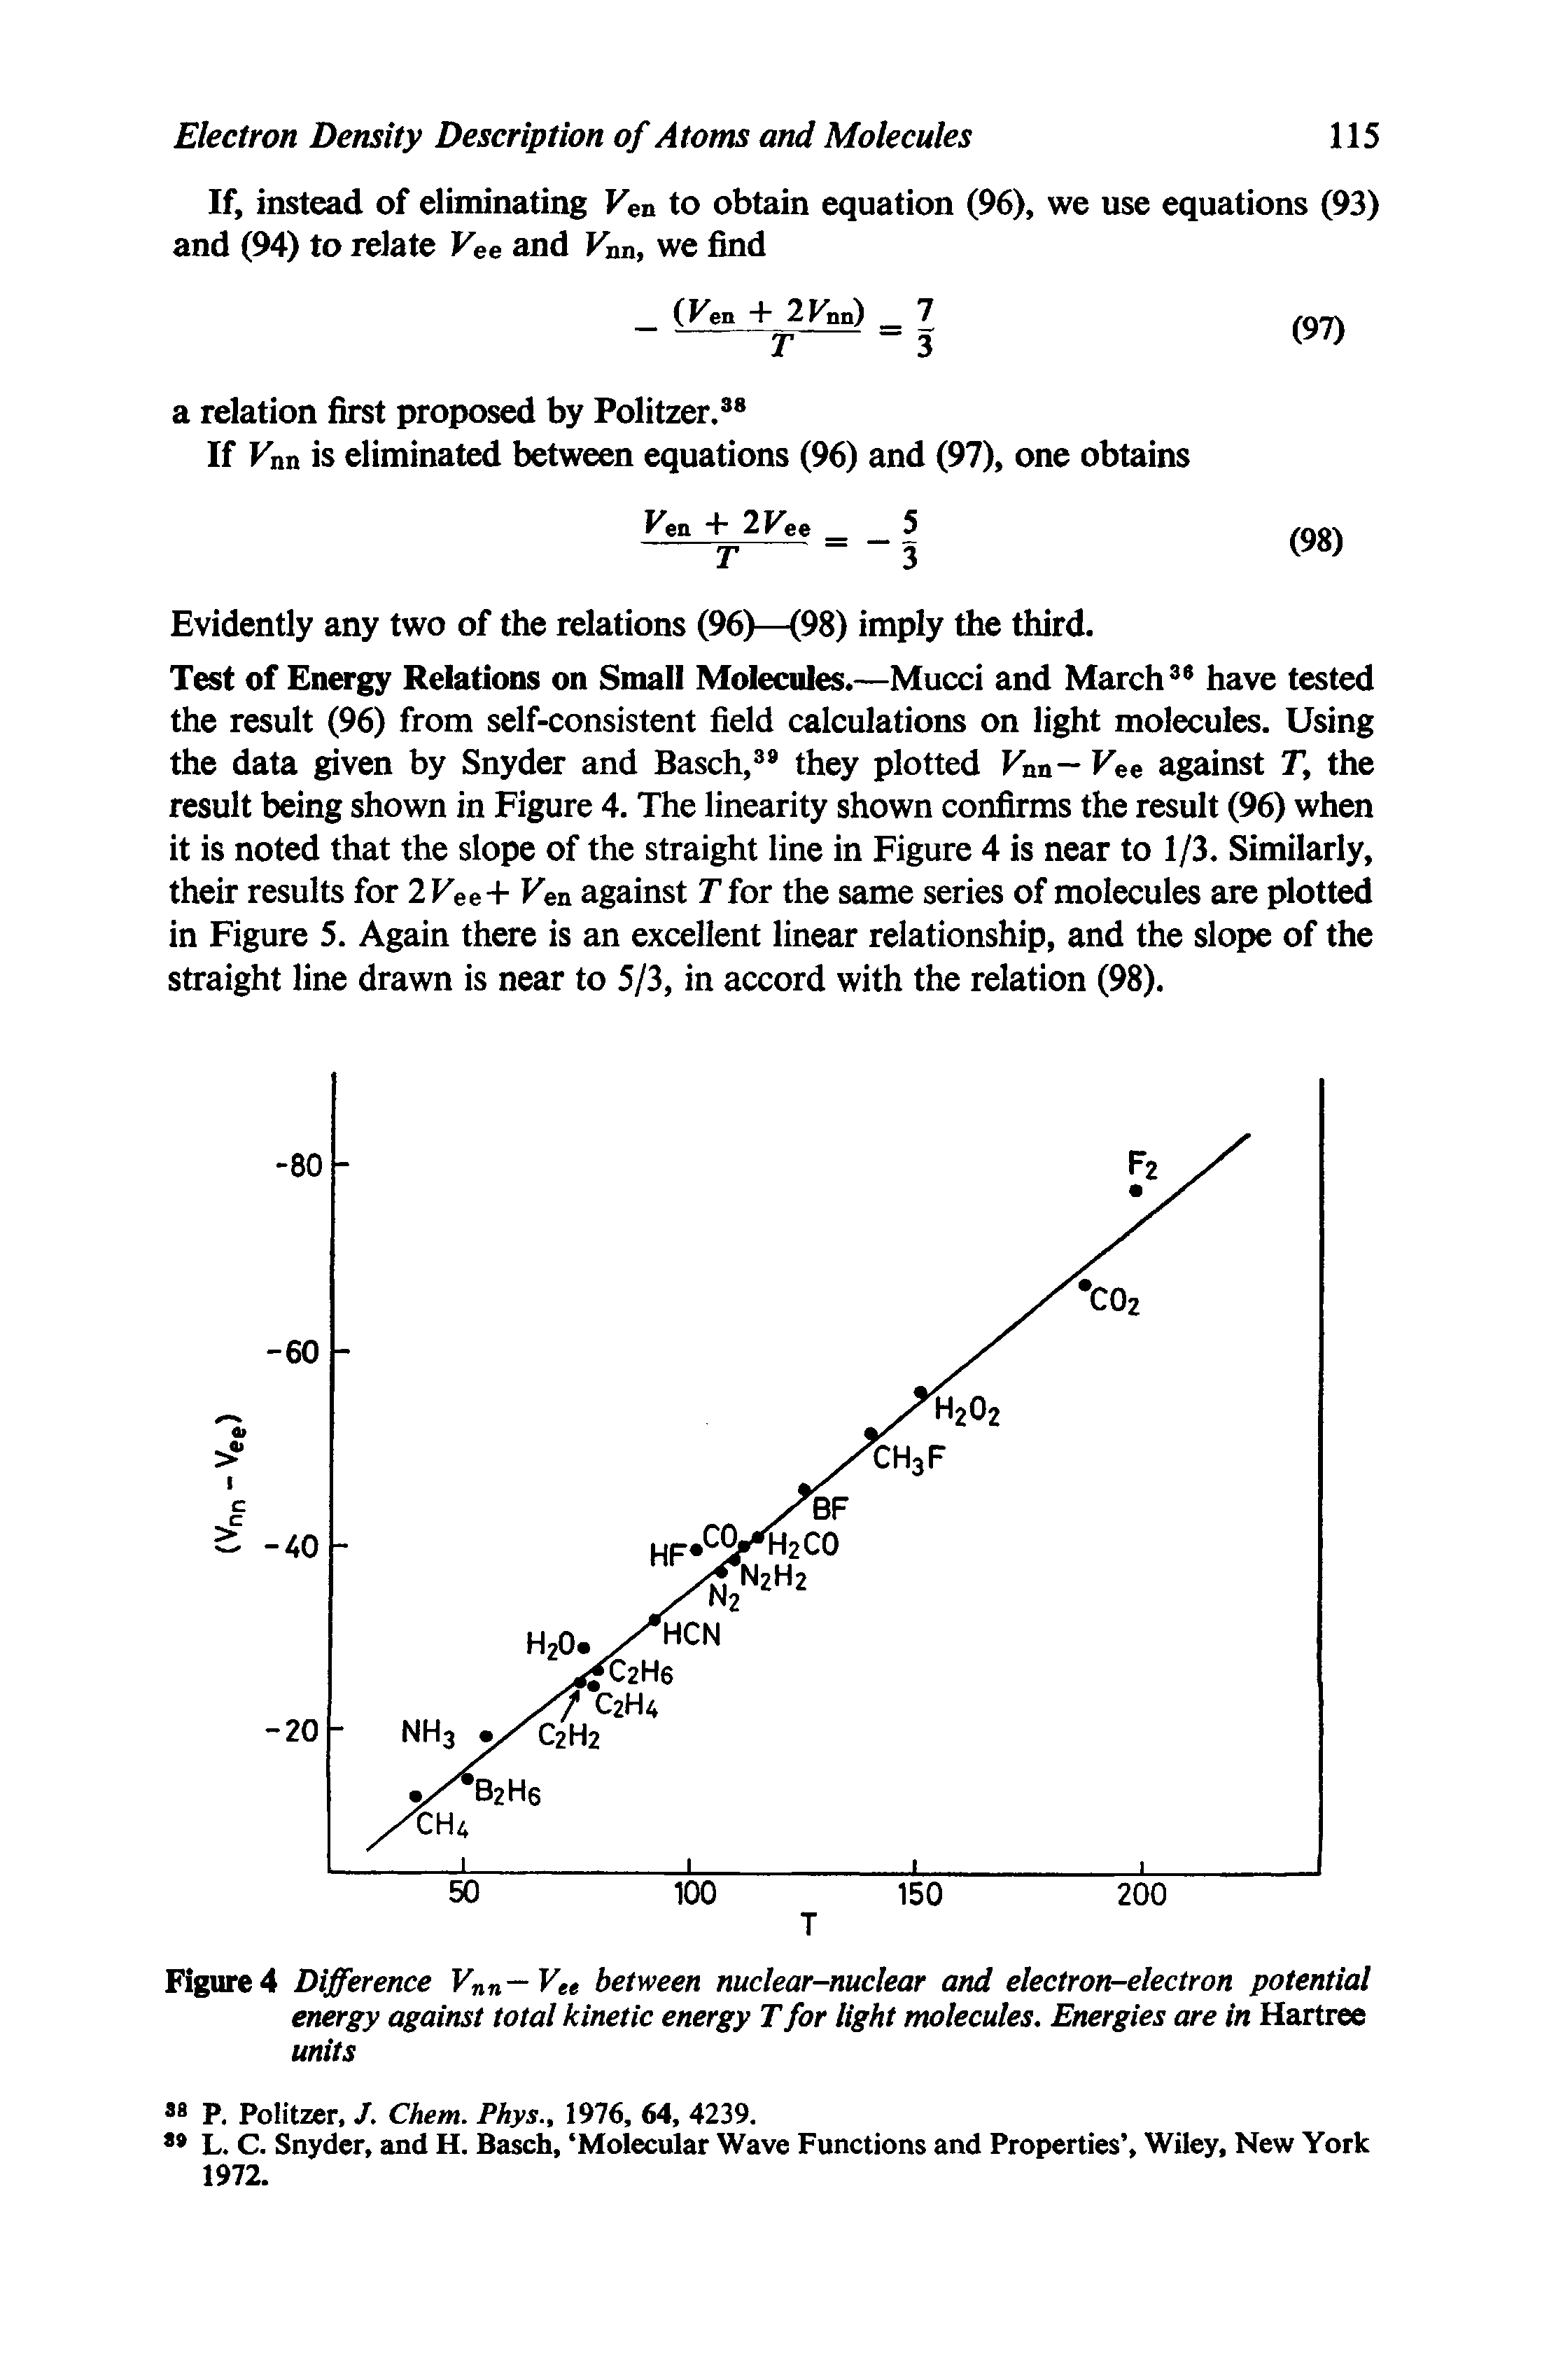 Figure 4 Difference Vnn—Vee between nuclear-nuclear and electron-electron potential energy against total kinetic energy T for light molecules. Energies are in Hartree units...